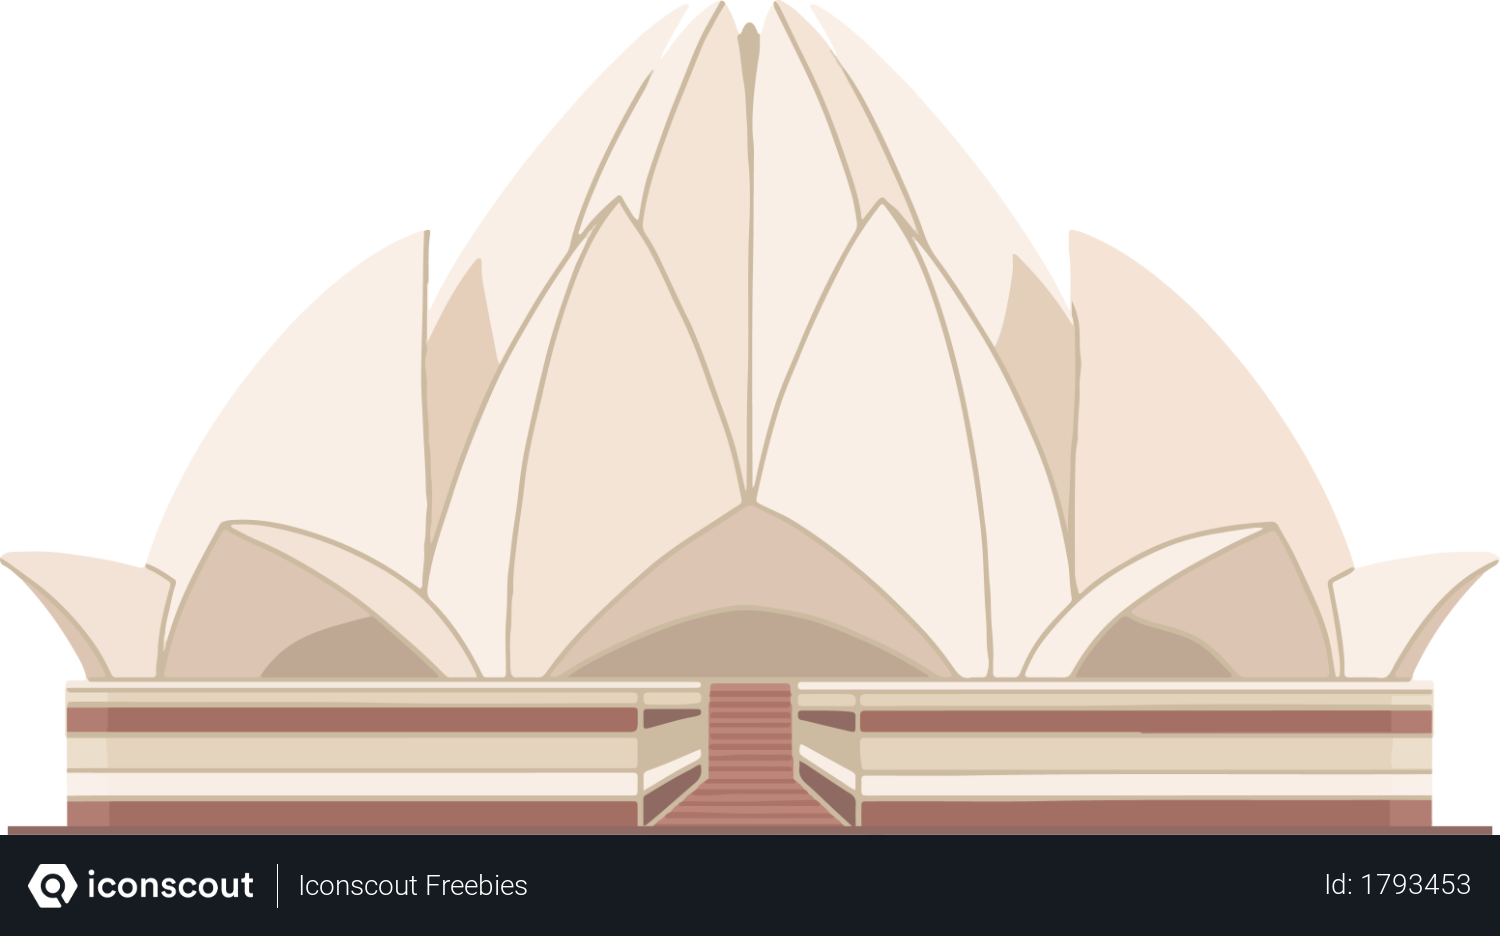 Lotus Temple Architecture Stock Vector (Royalty Free) 528028159 |  Shutterstock